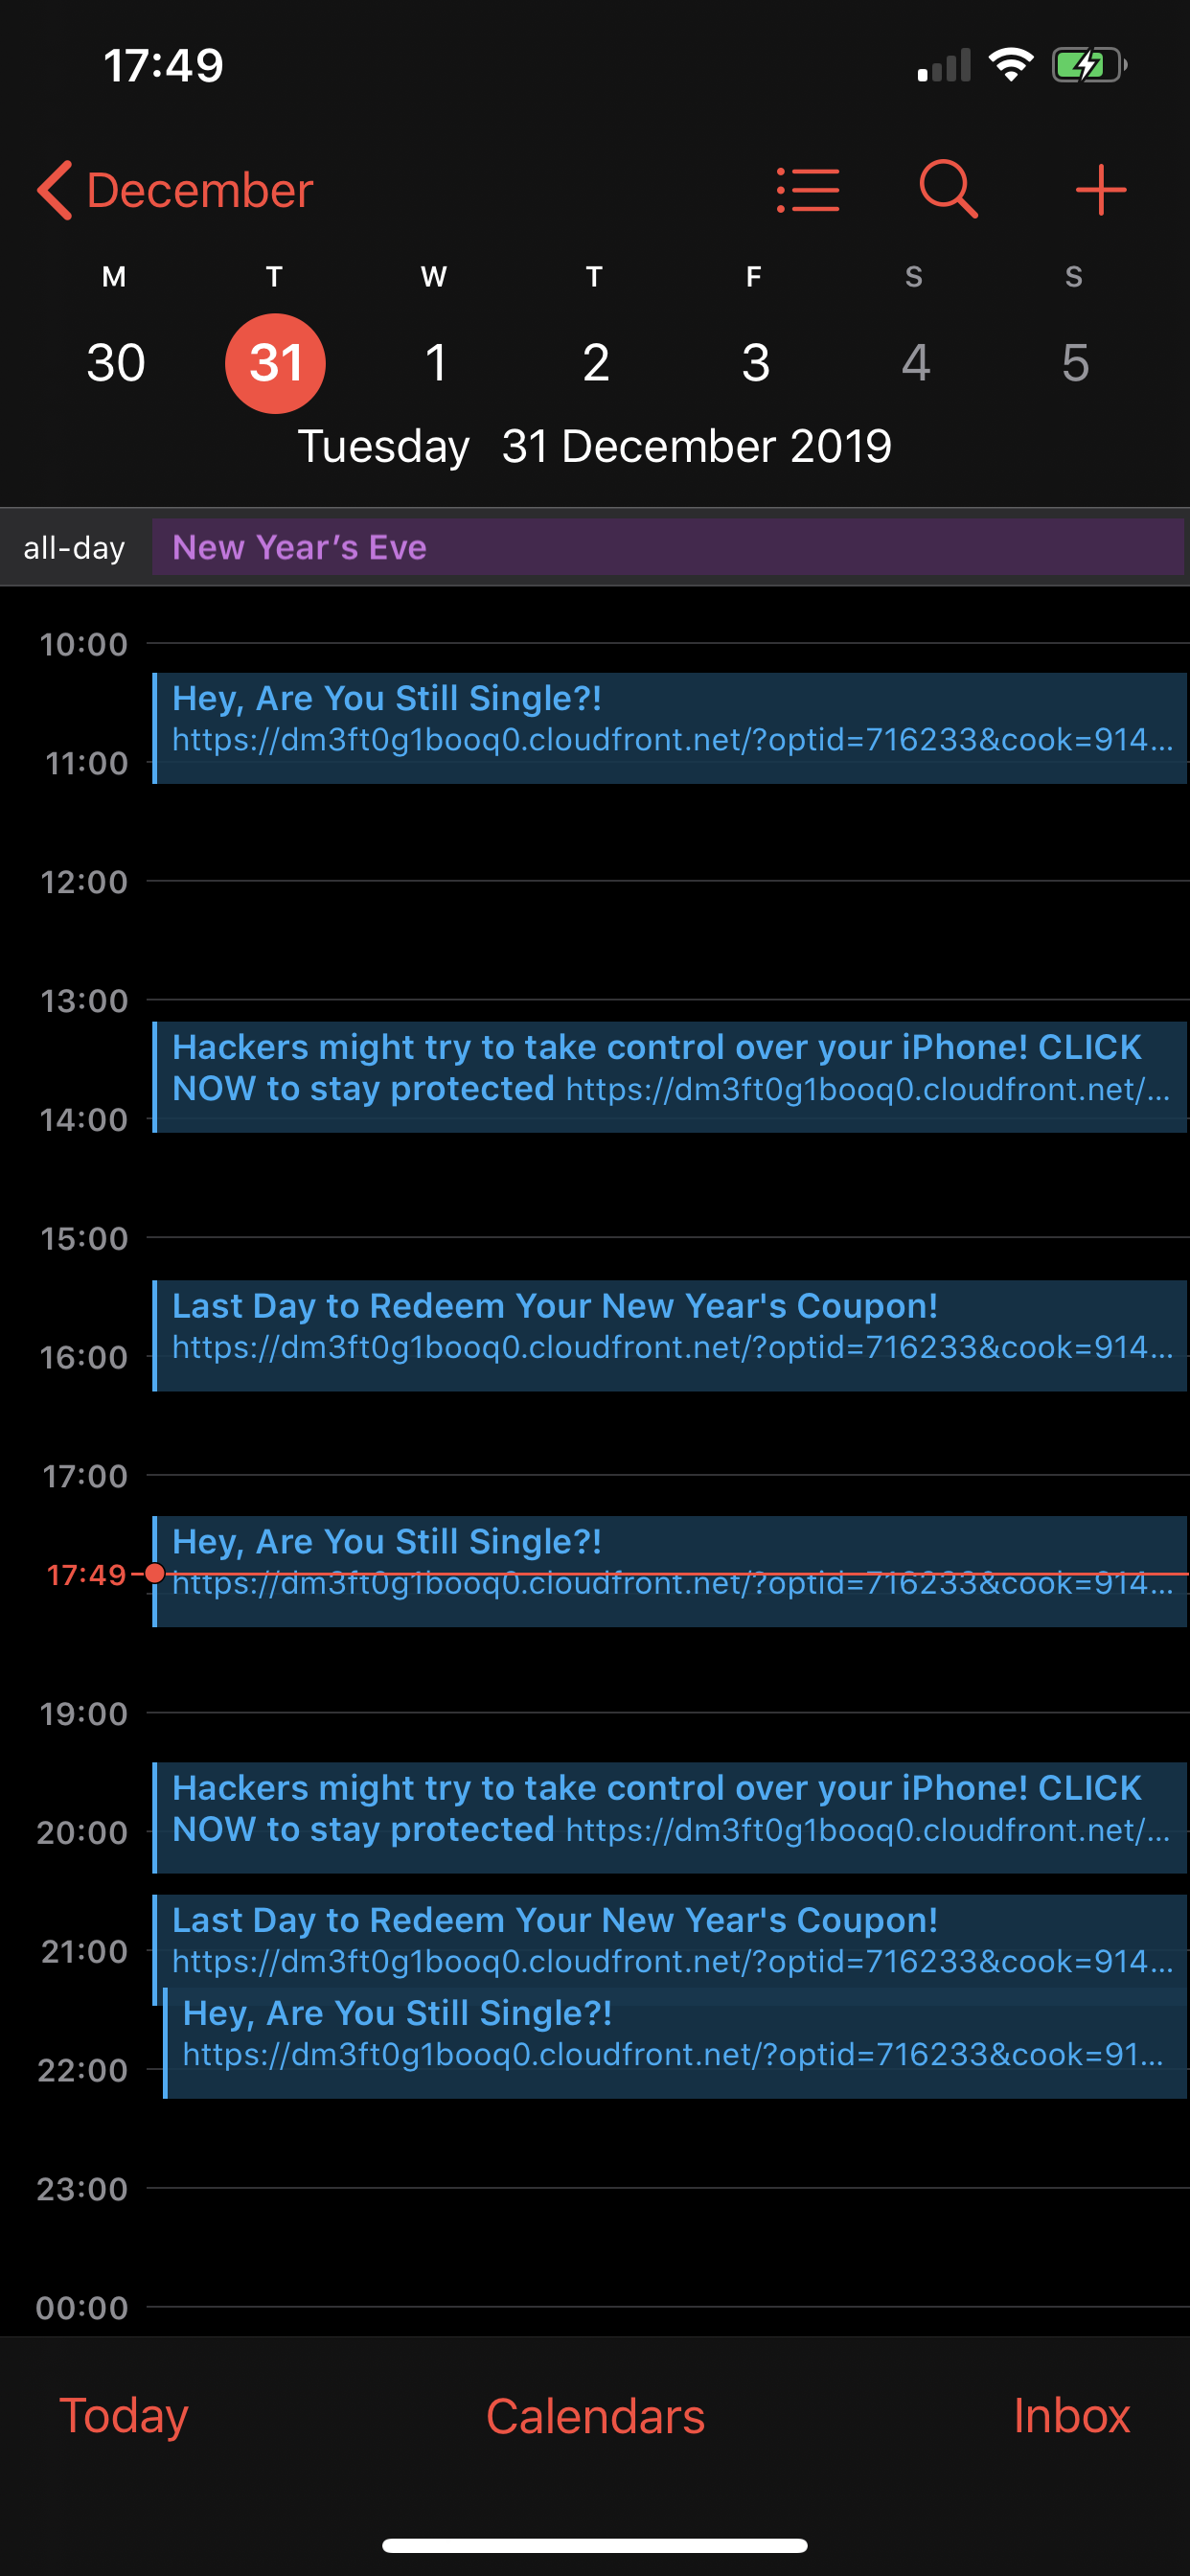 Iphone calendar hacked how to fix